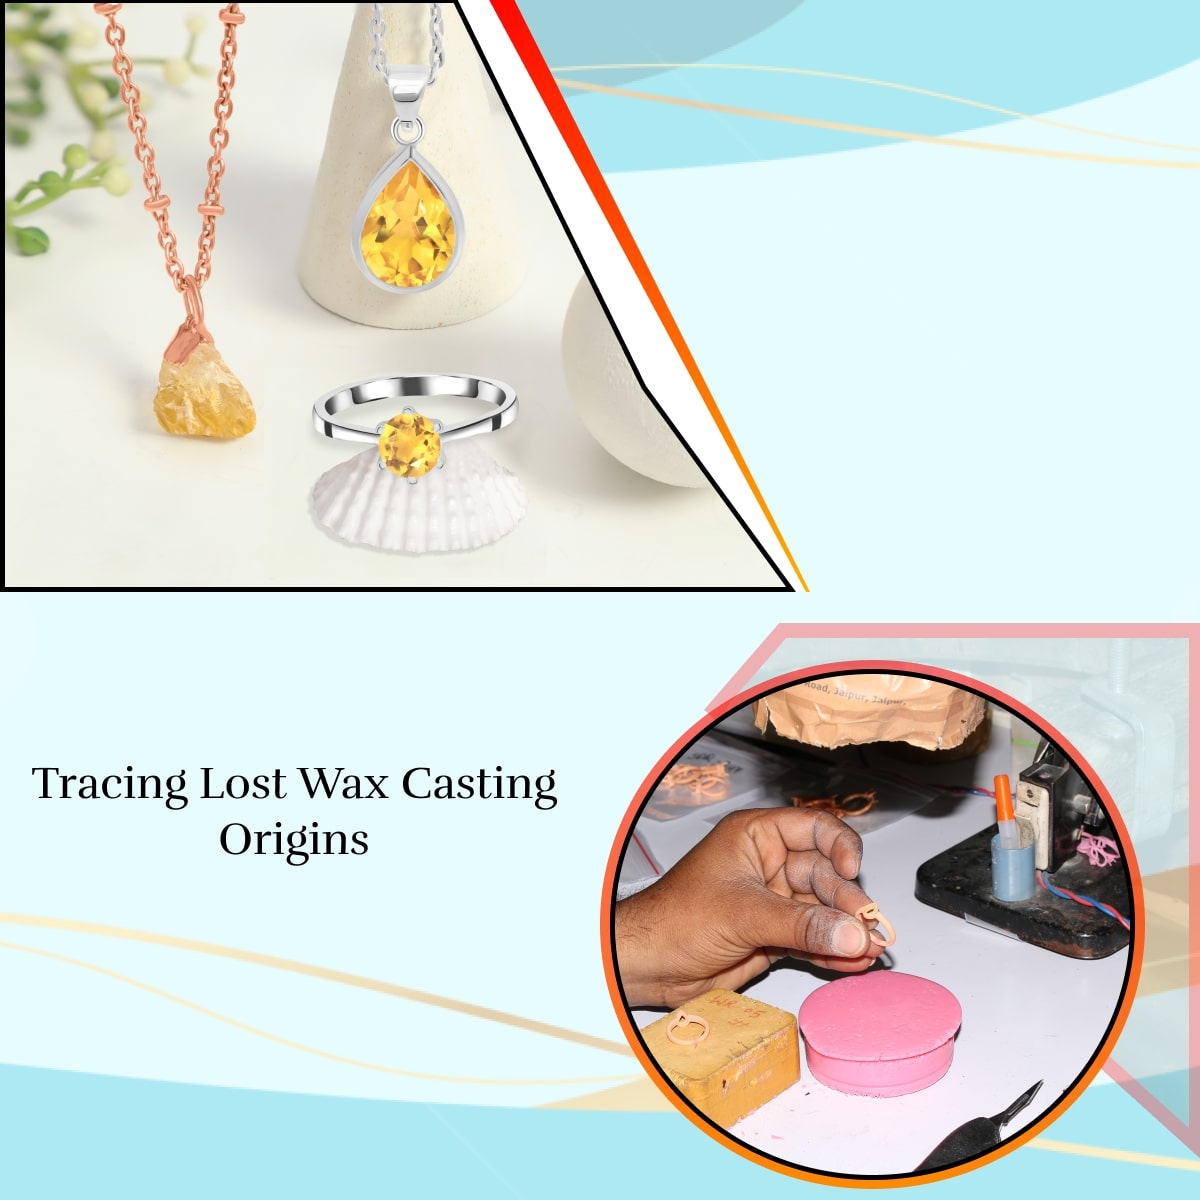 The History of Lost-Wax Casting